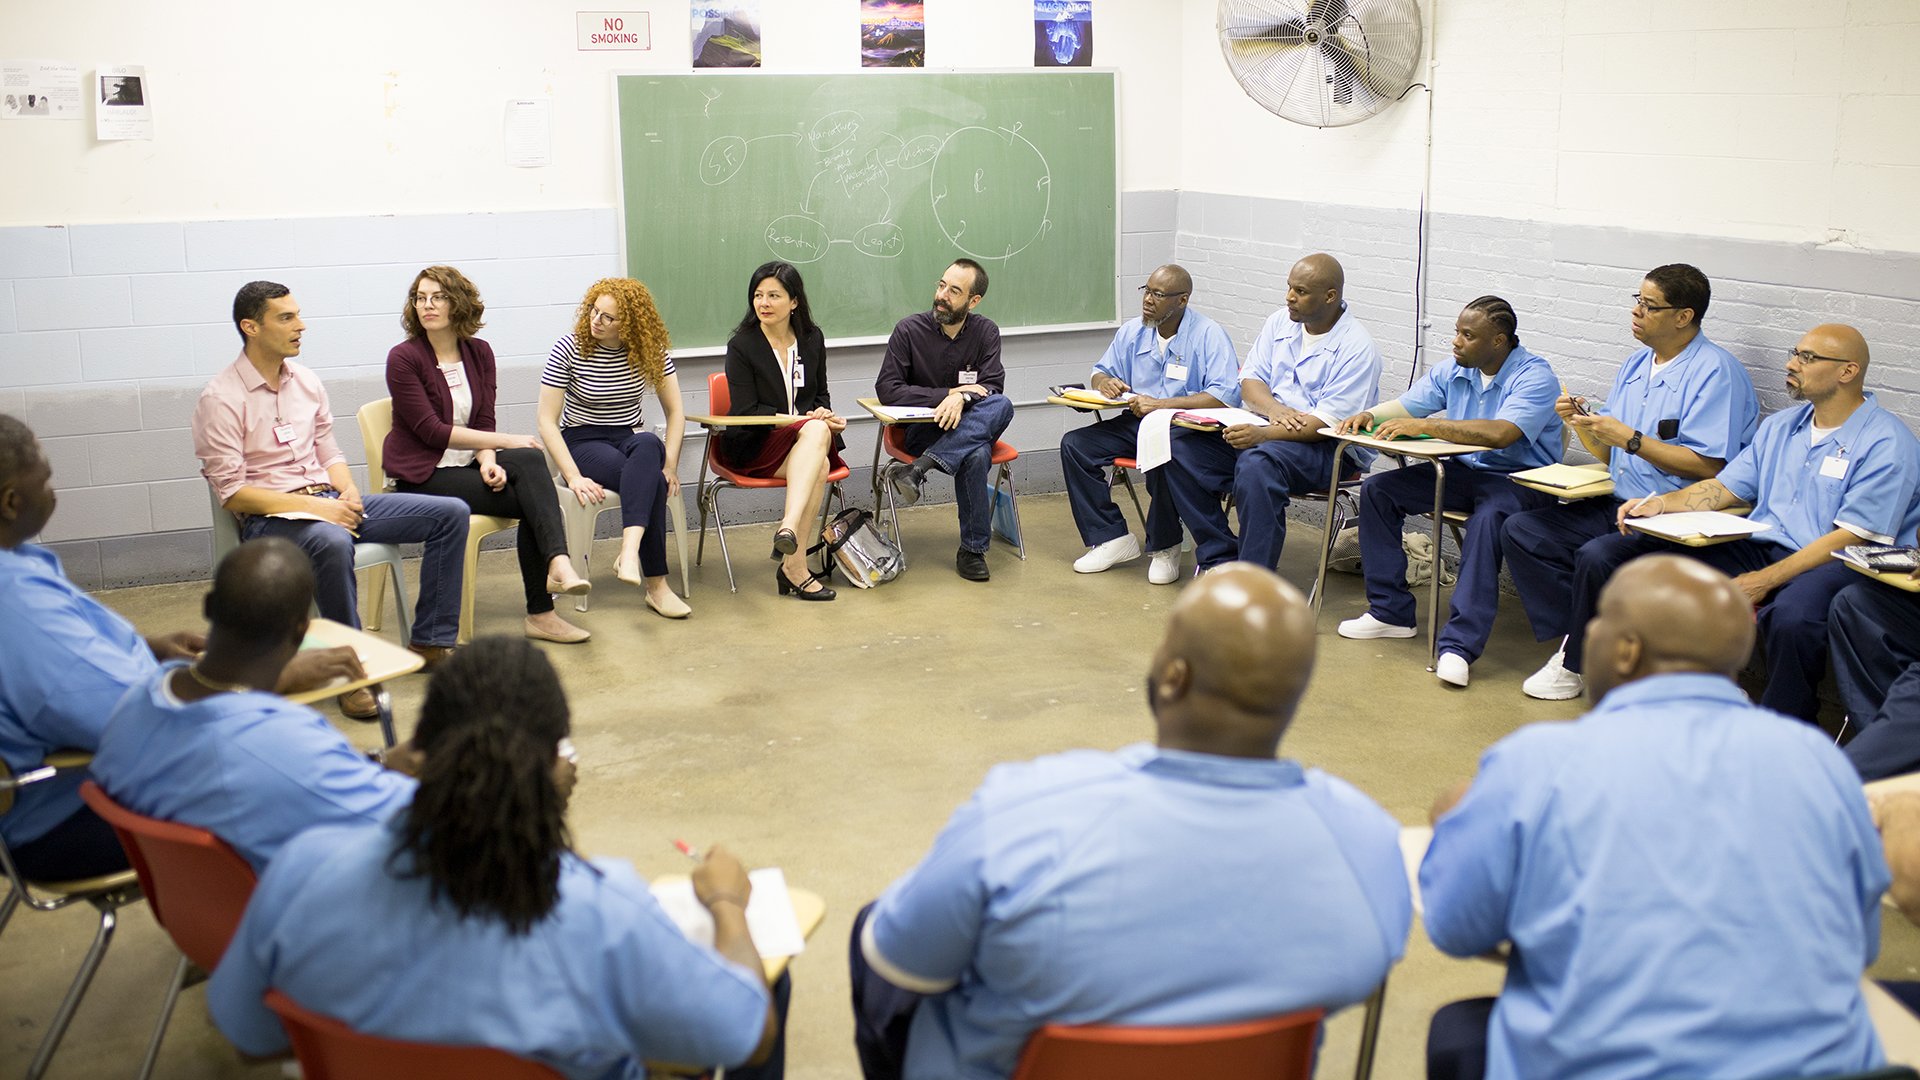 Northwestern University faculty meet with students at Stateville Correctional Center. (Courtesy Northwestern University)